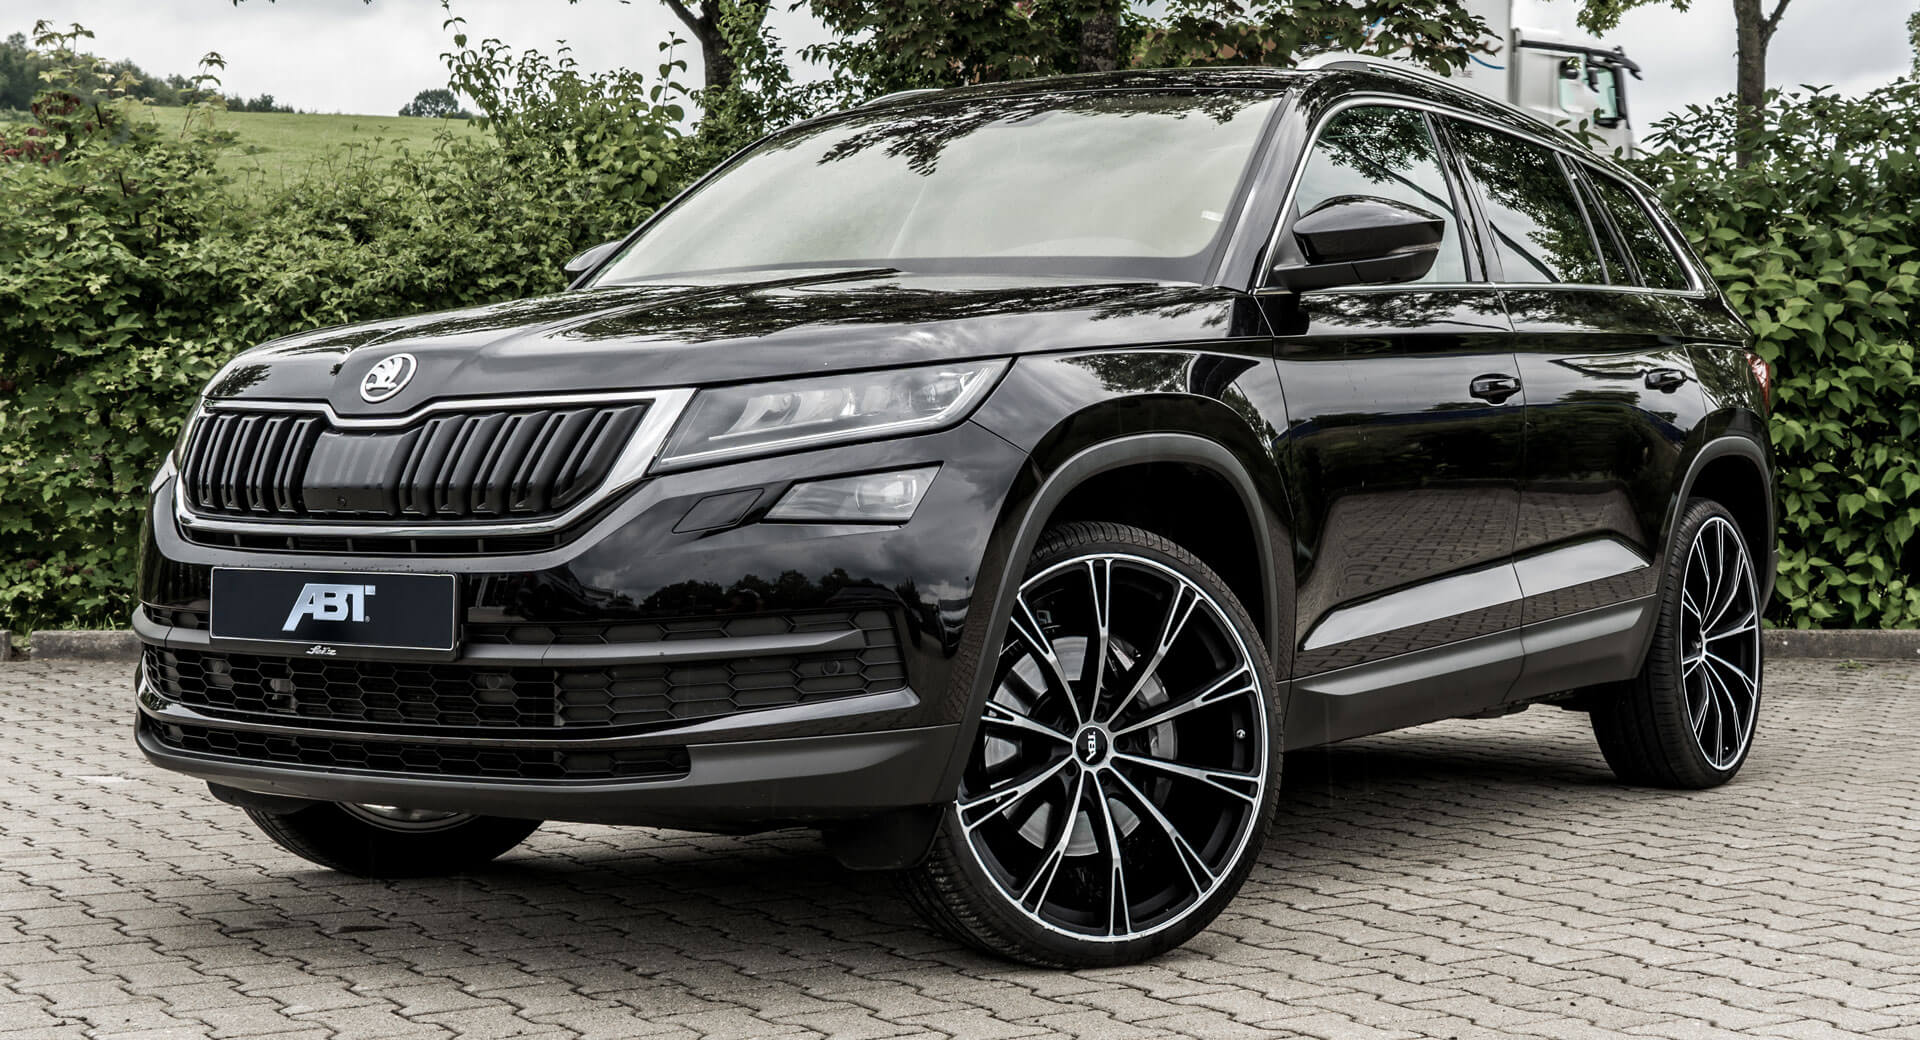 213 HP Skoda Kodiaq By ABT Is No RS, But It'll Have To Do If You